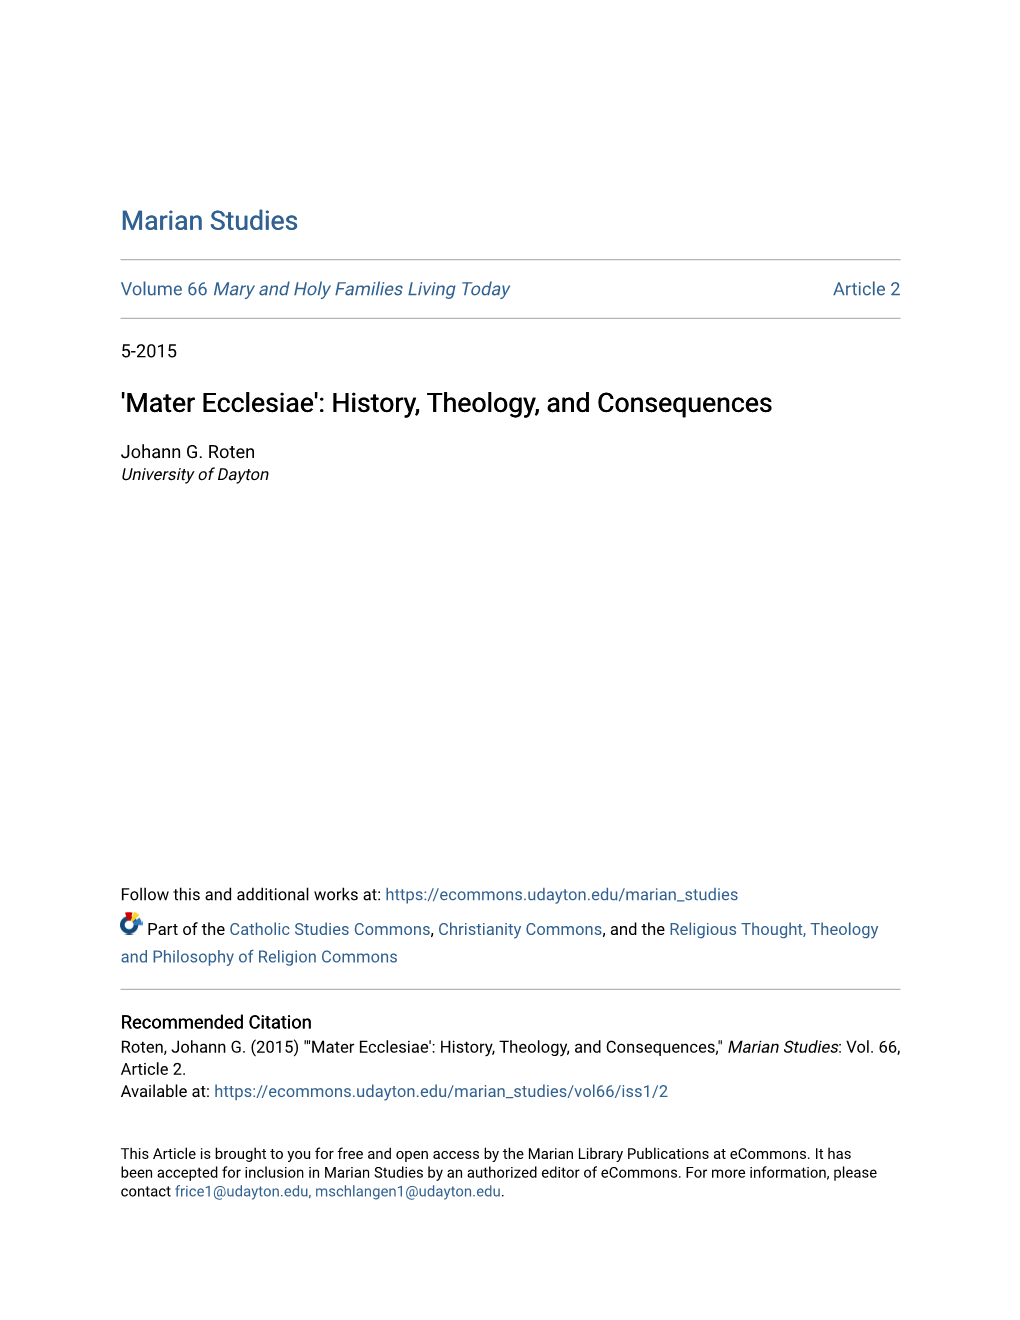 'Mater Ecclesiae': History, Theology, and Consequences